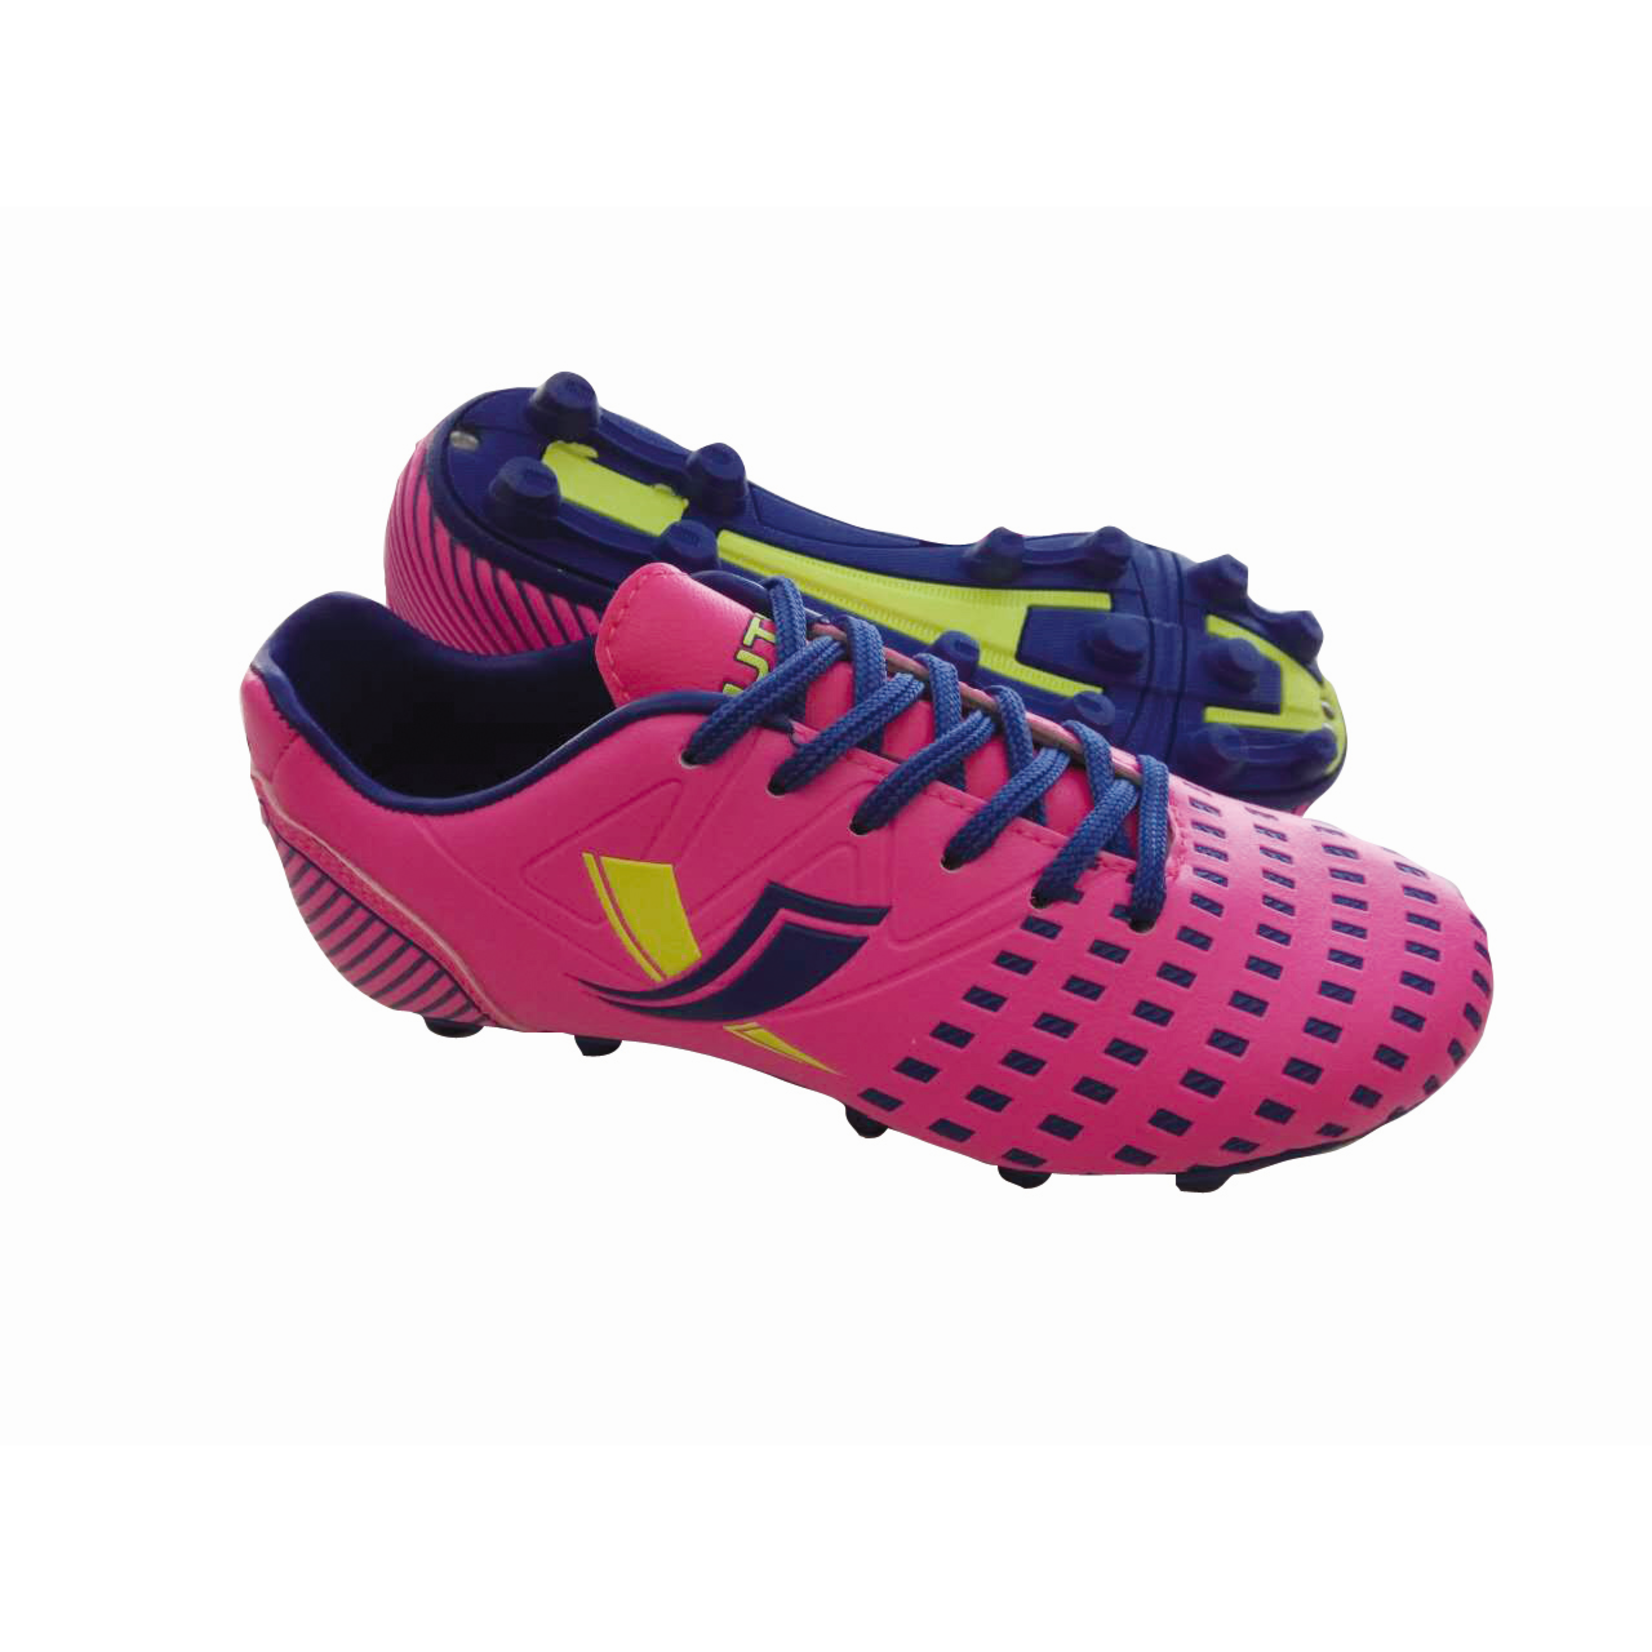 Berio ete Soccer Shoes Guts Youth